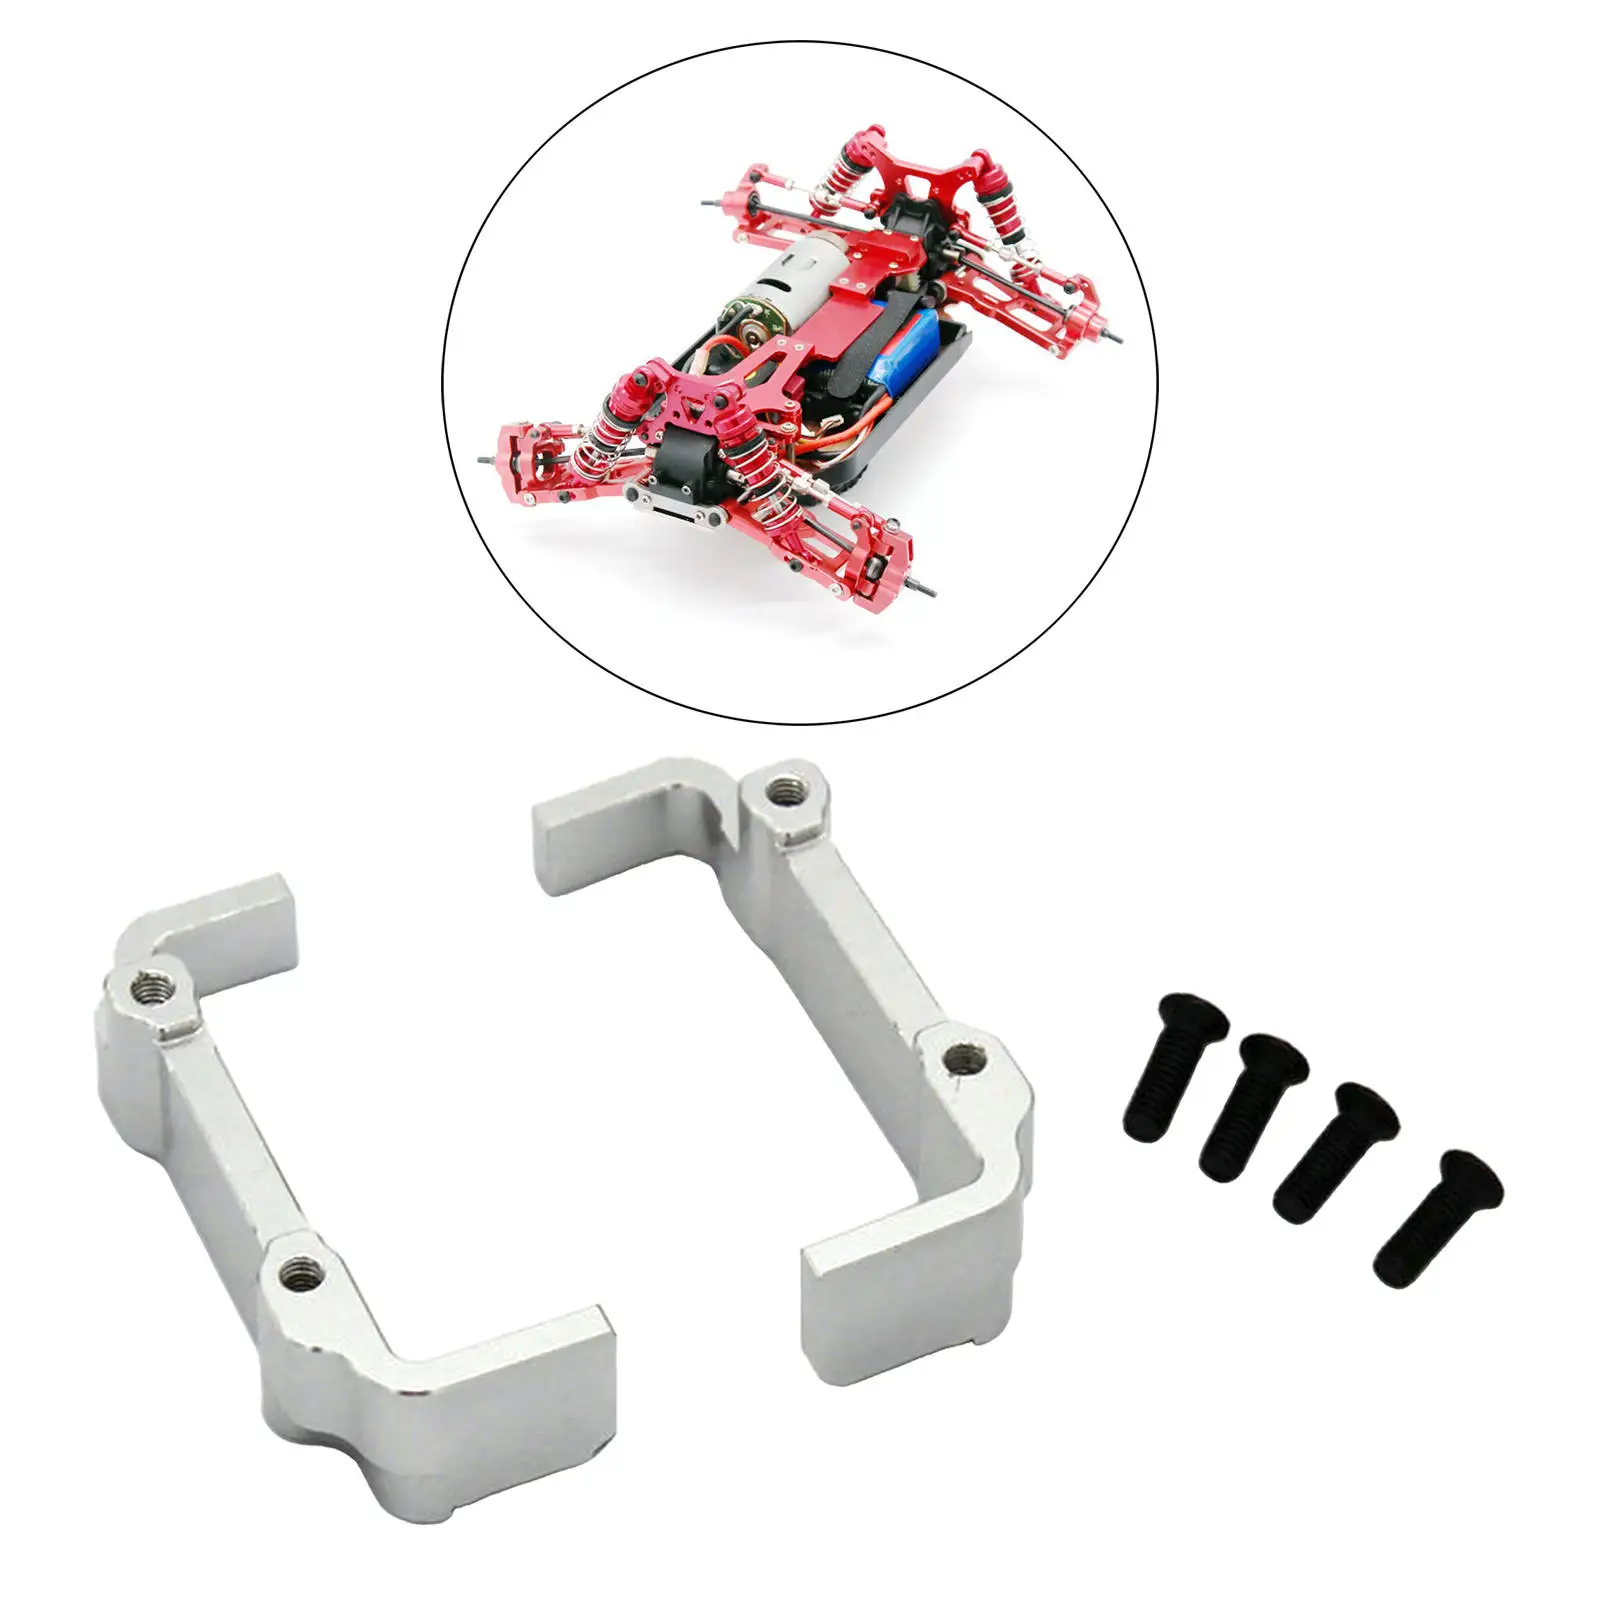 2 Pieces RC Car Battery Holder for Wltoys 144001 124017 1:12 RC Car Replaces Upgrade Parts